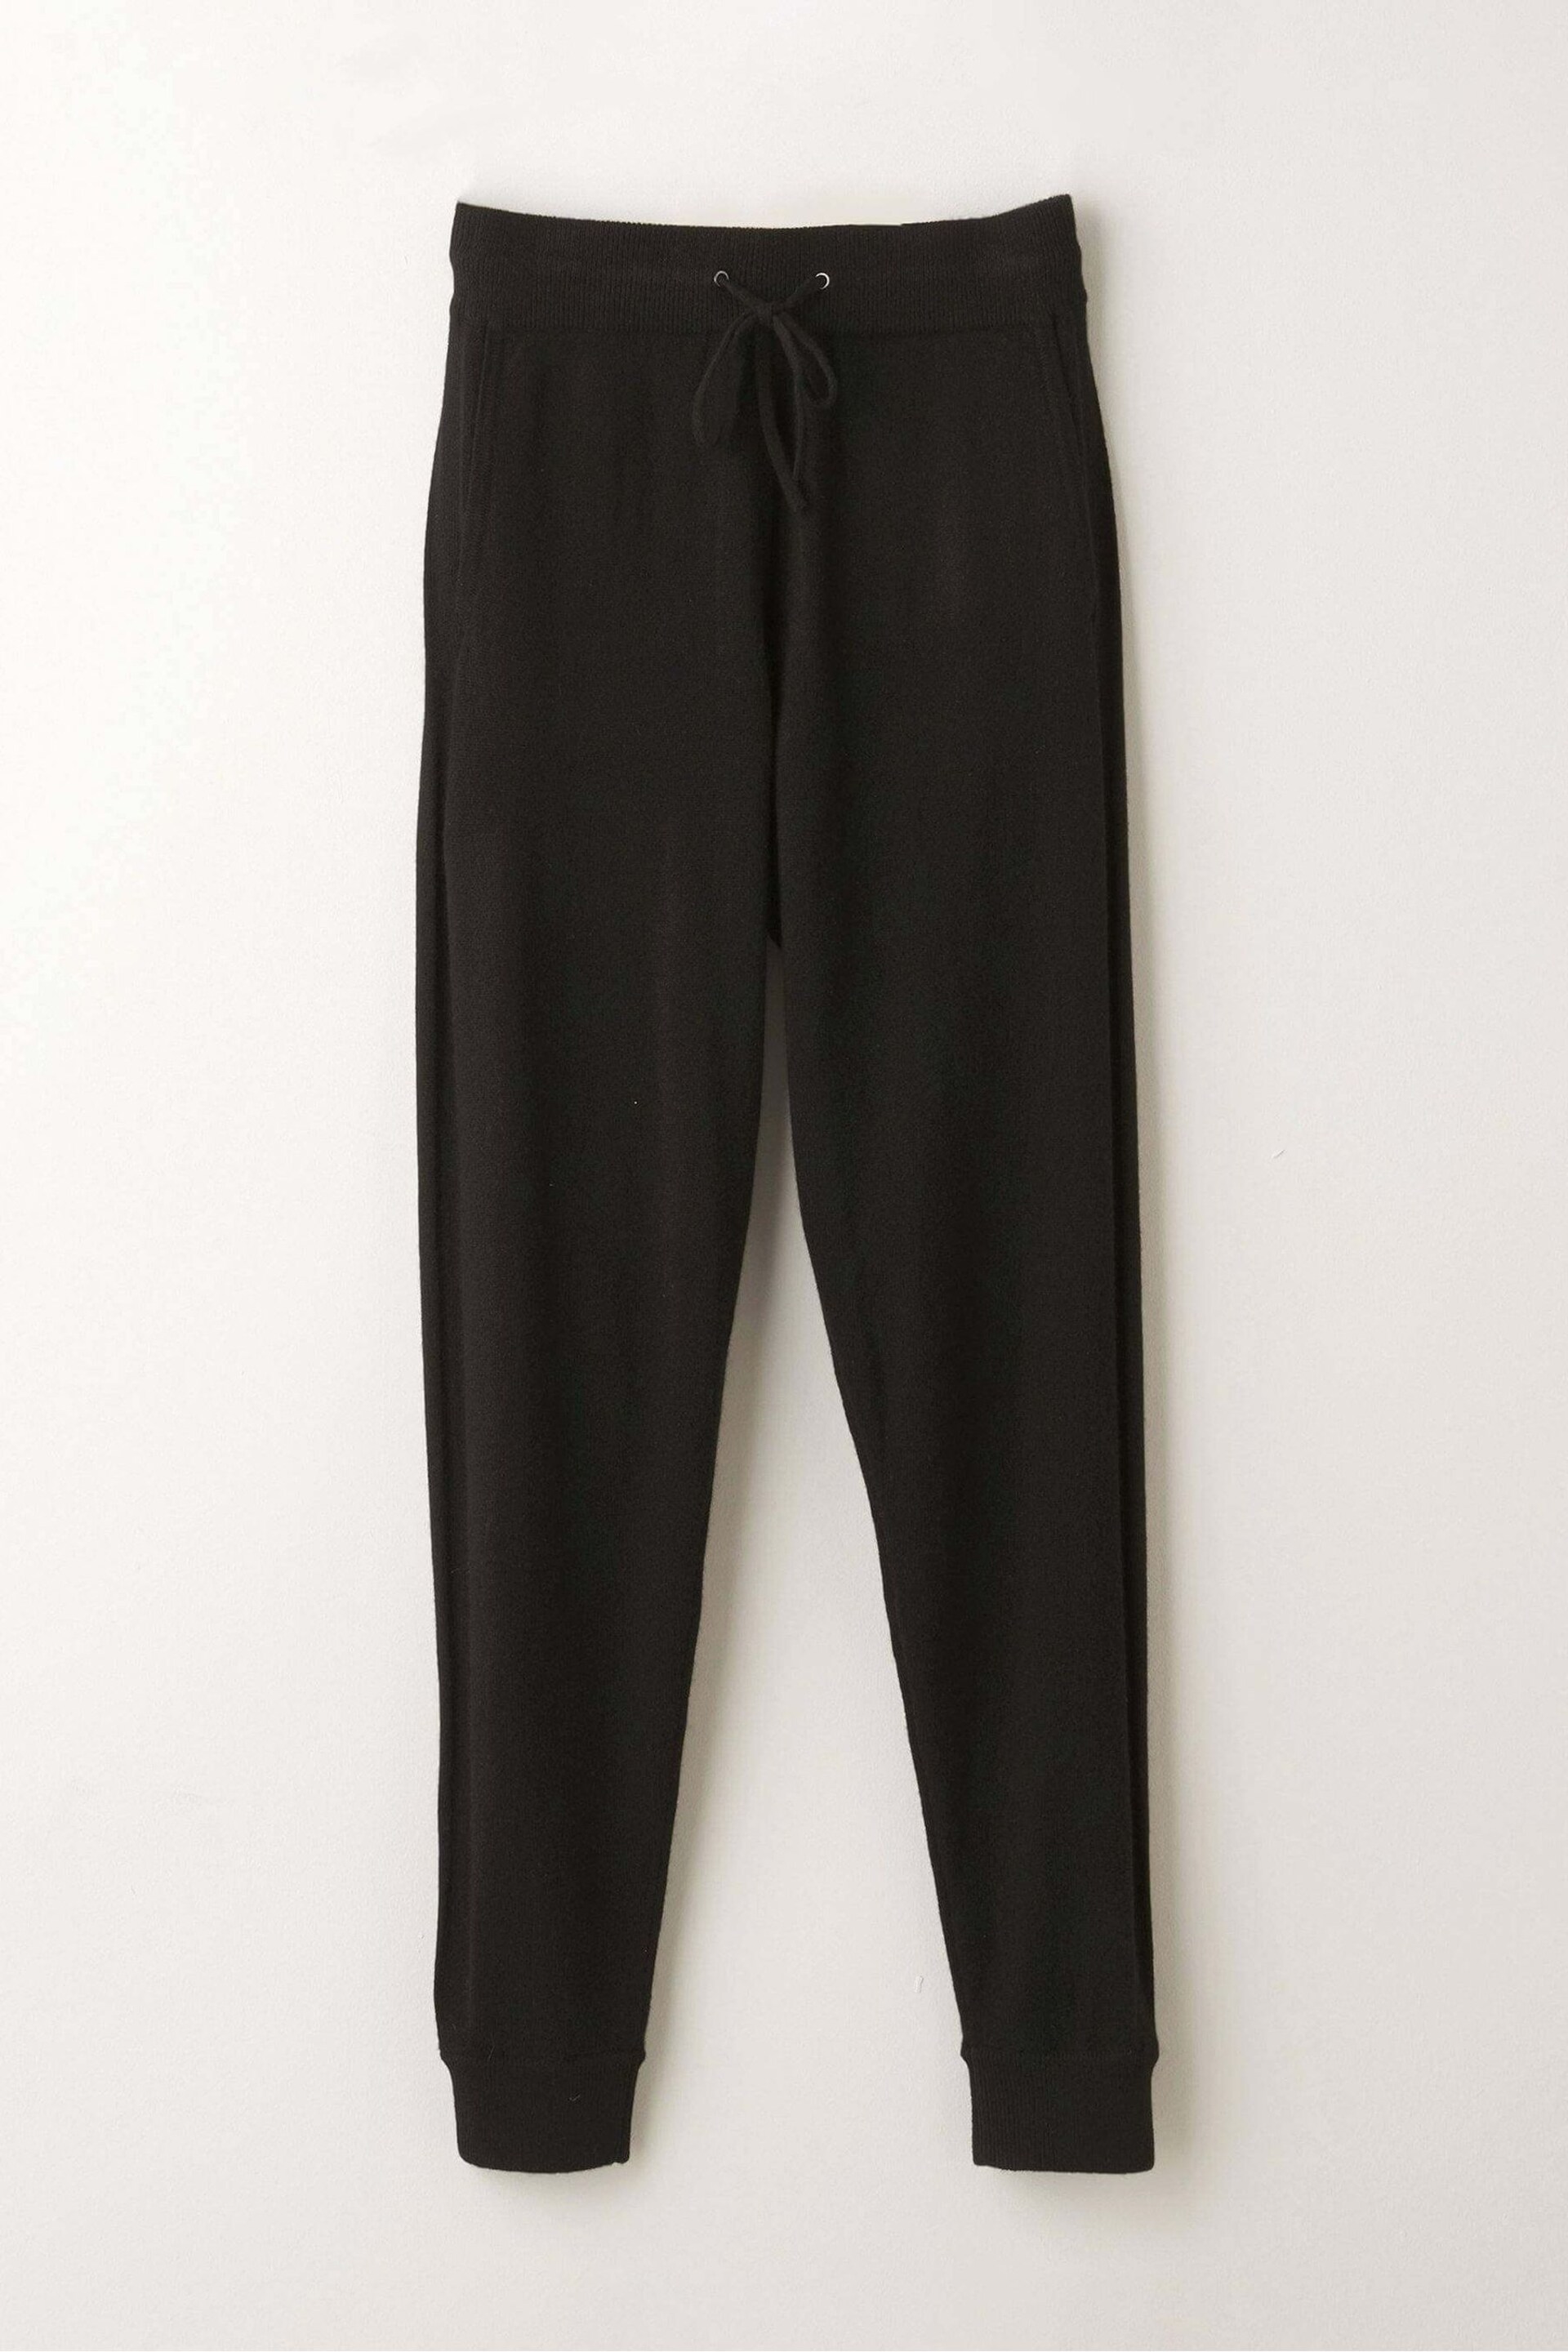 Truly Cashmere Black Joggers - Image 2 of 2